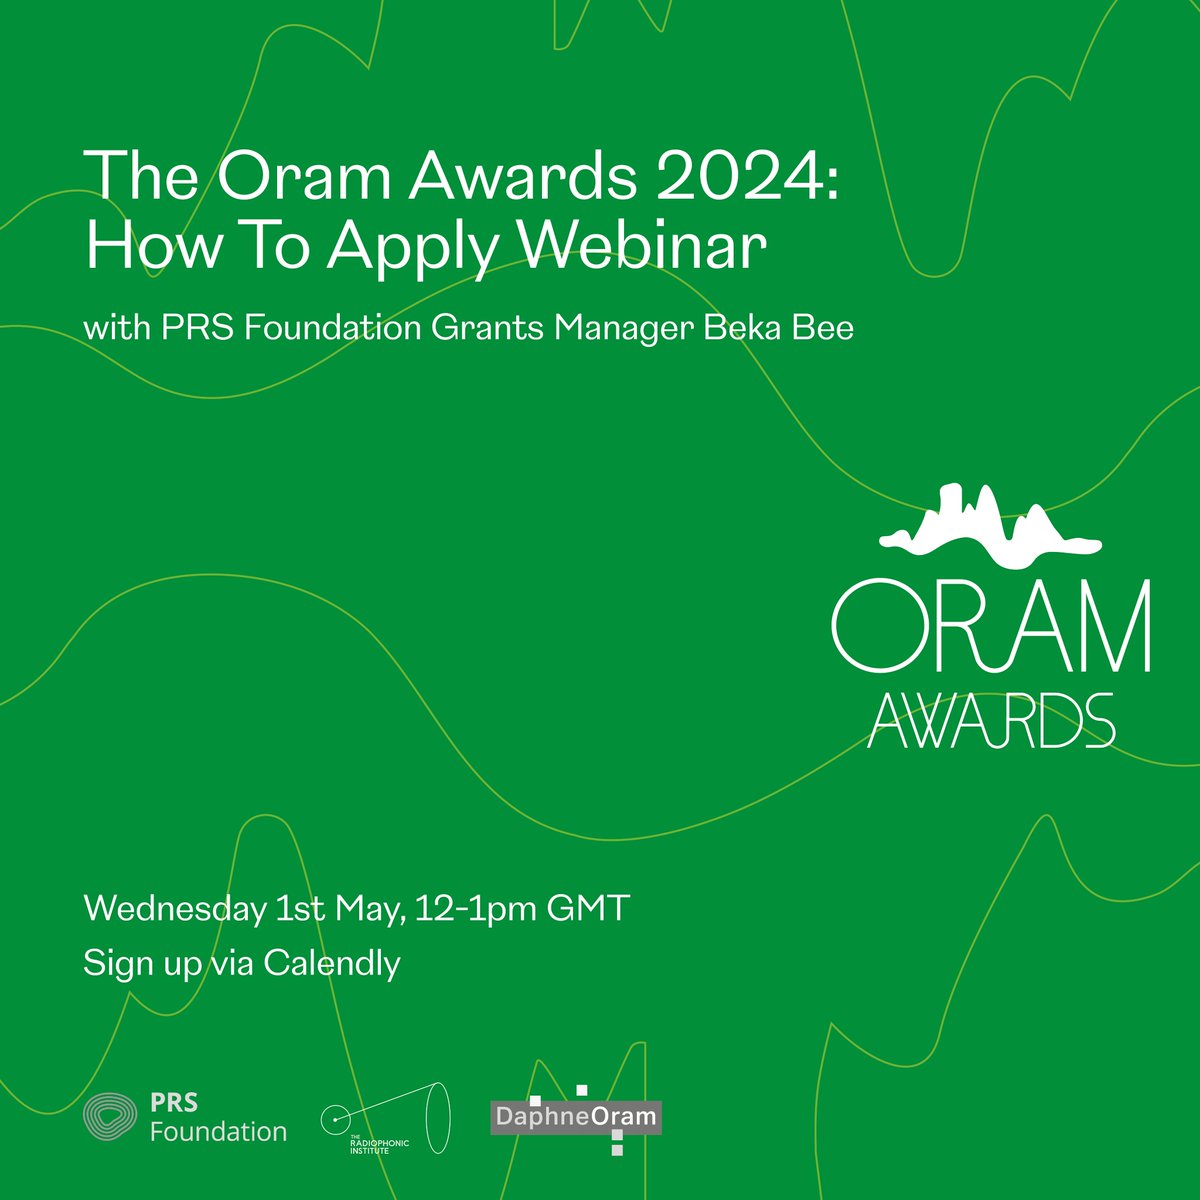 Join @PRSFoundation Grants Manager Beka Bee for this free online webinar for The Oram Awards 2024, covering top tips, a walkthrough of the application form and a live Q&A. Wednesday, May 1st - 12 - 1 pm BST Sign up via the link below: shorturl.at/cqASZ